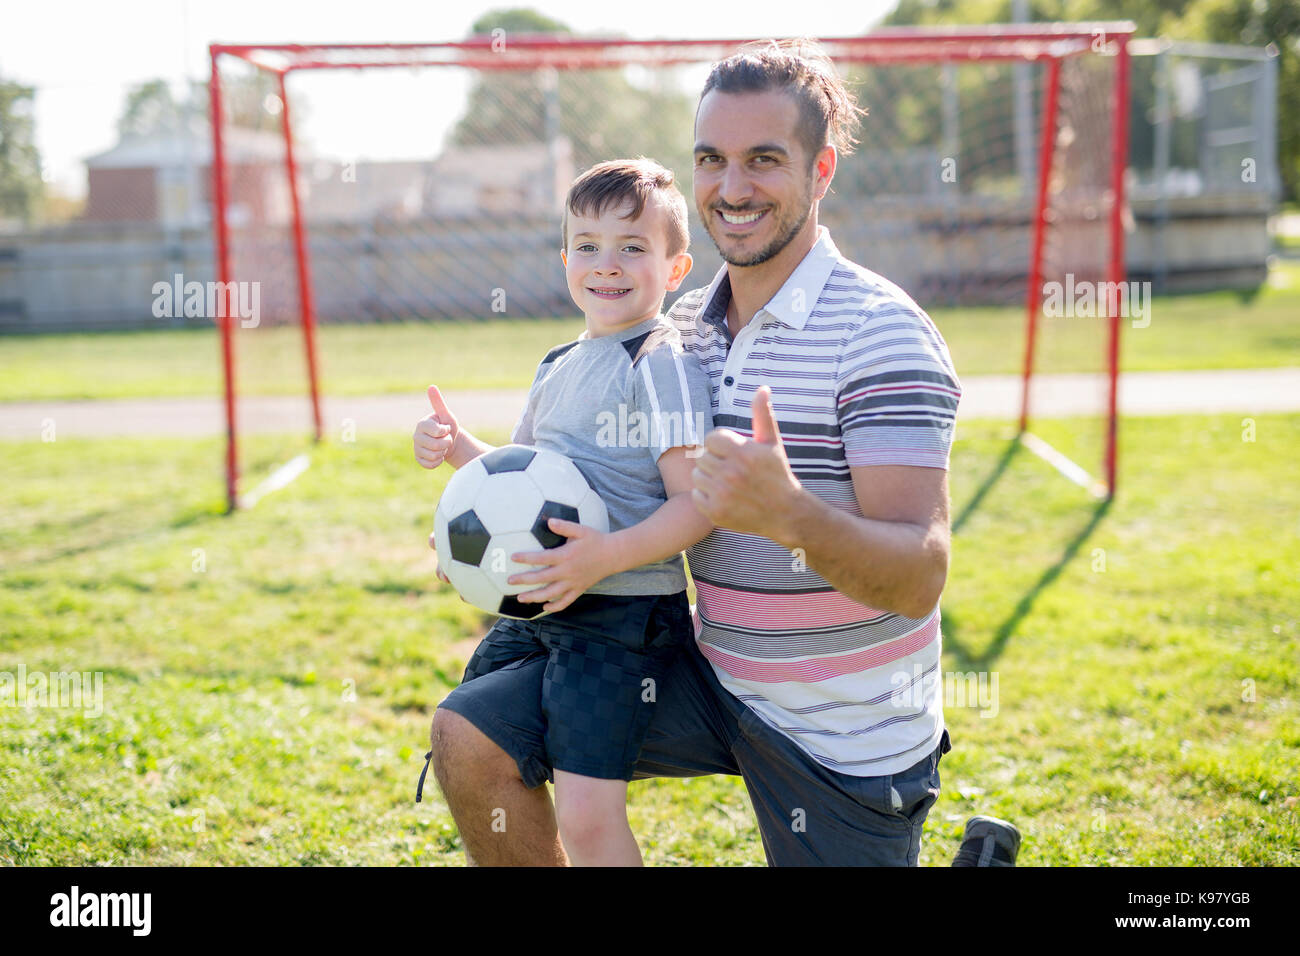 man with child playing football on field Stock Photo